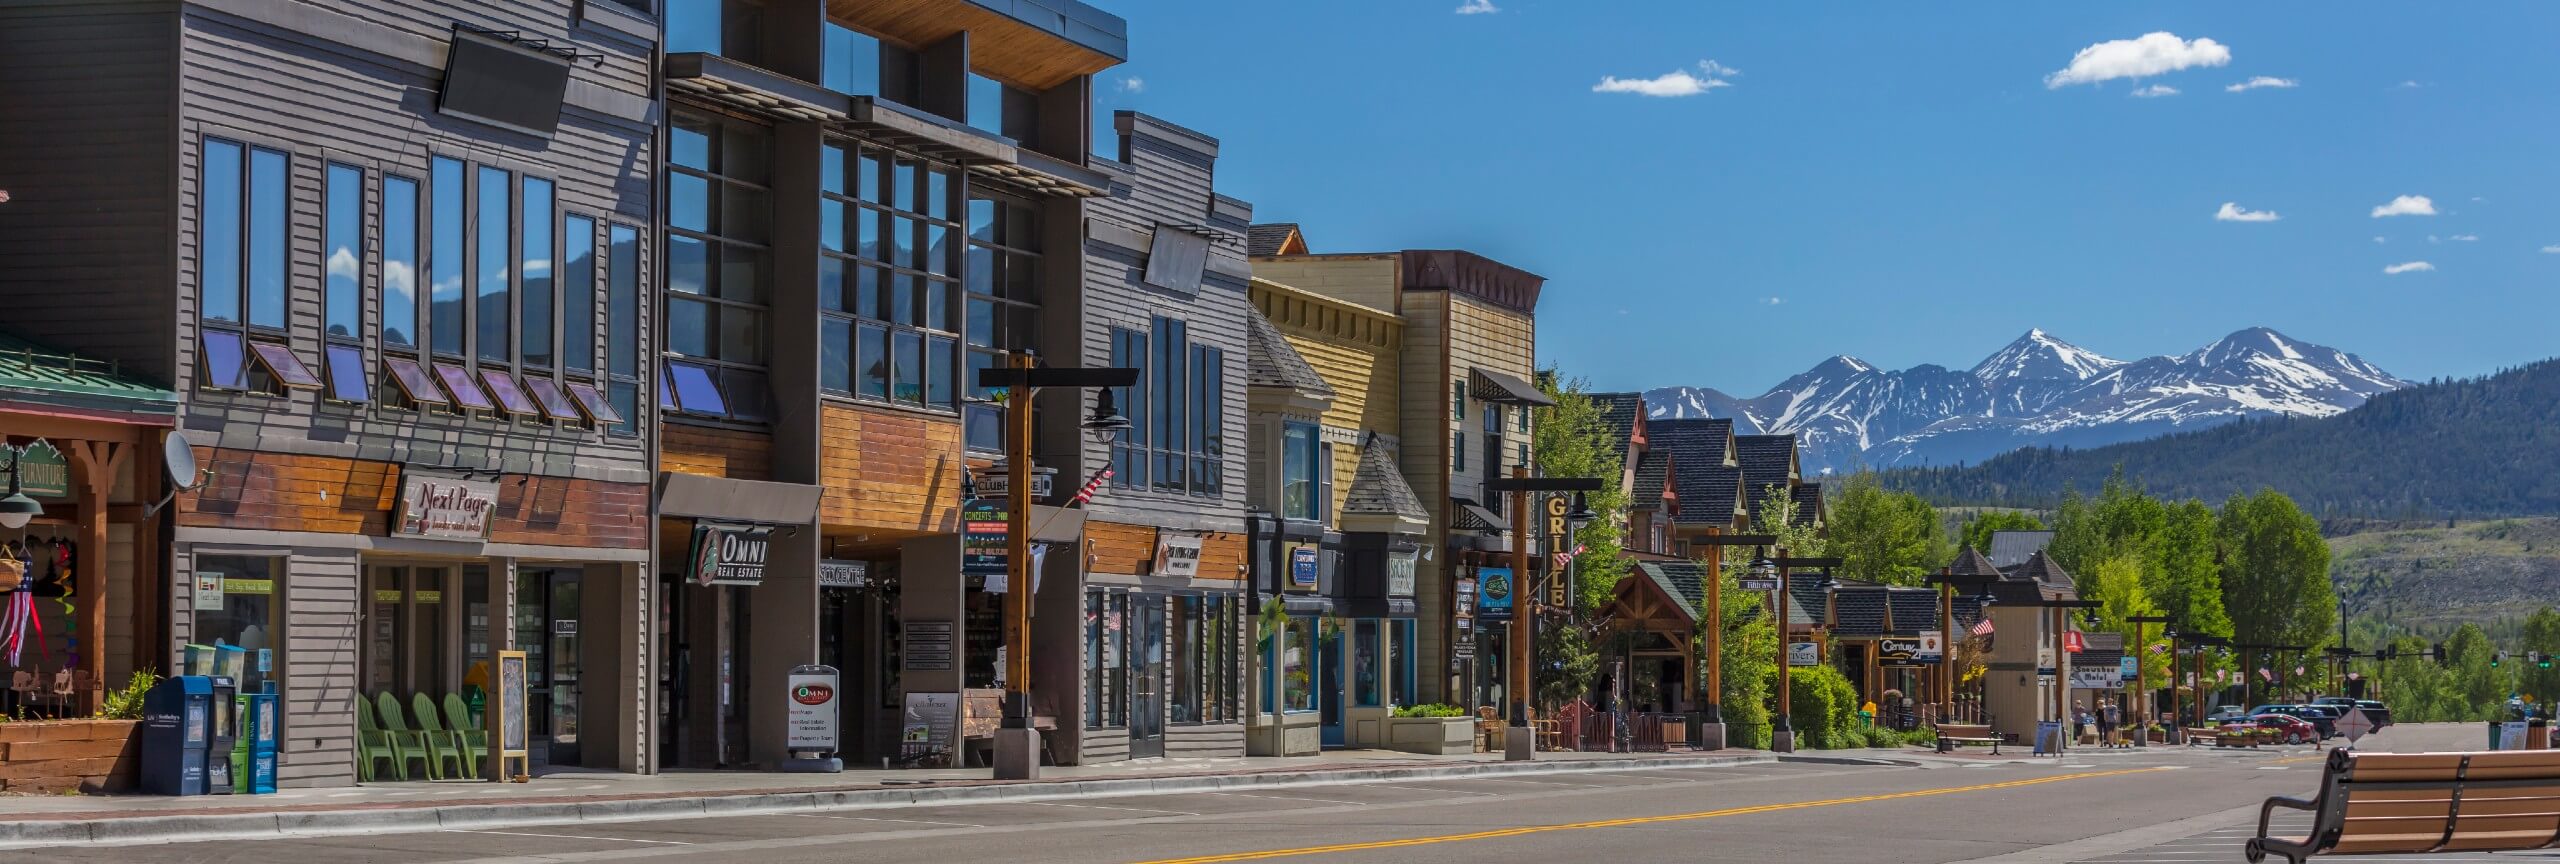 Frisco Main Street looking east with mountain in background